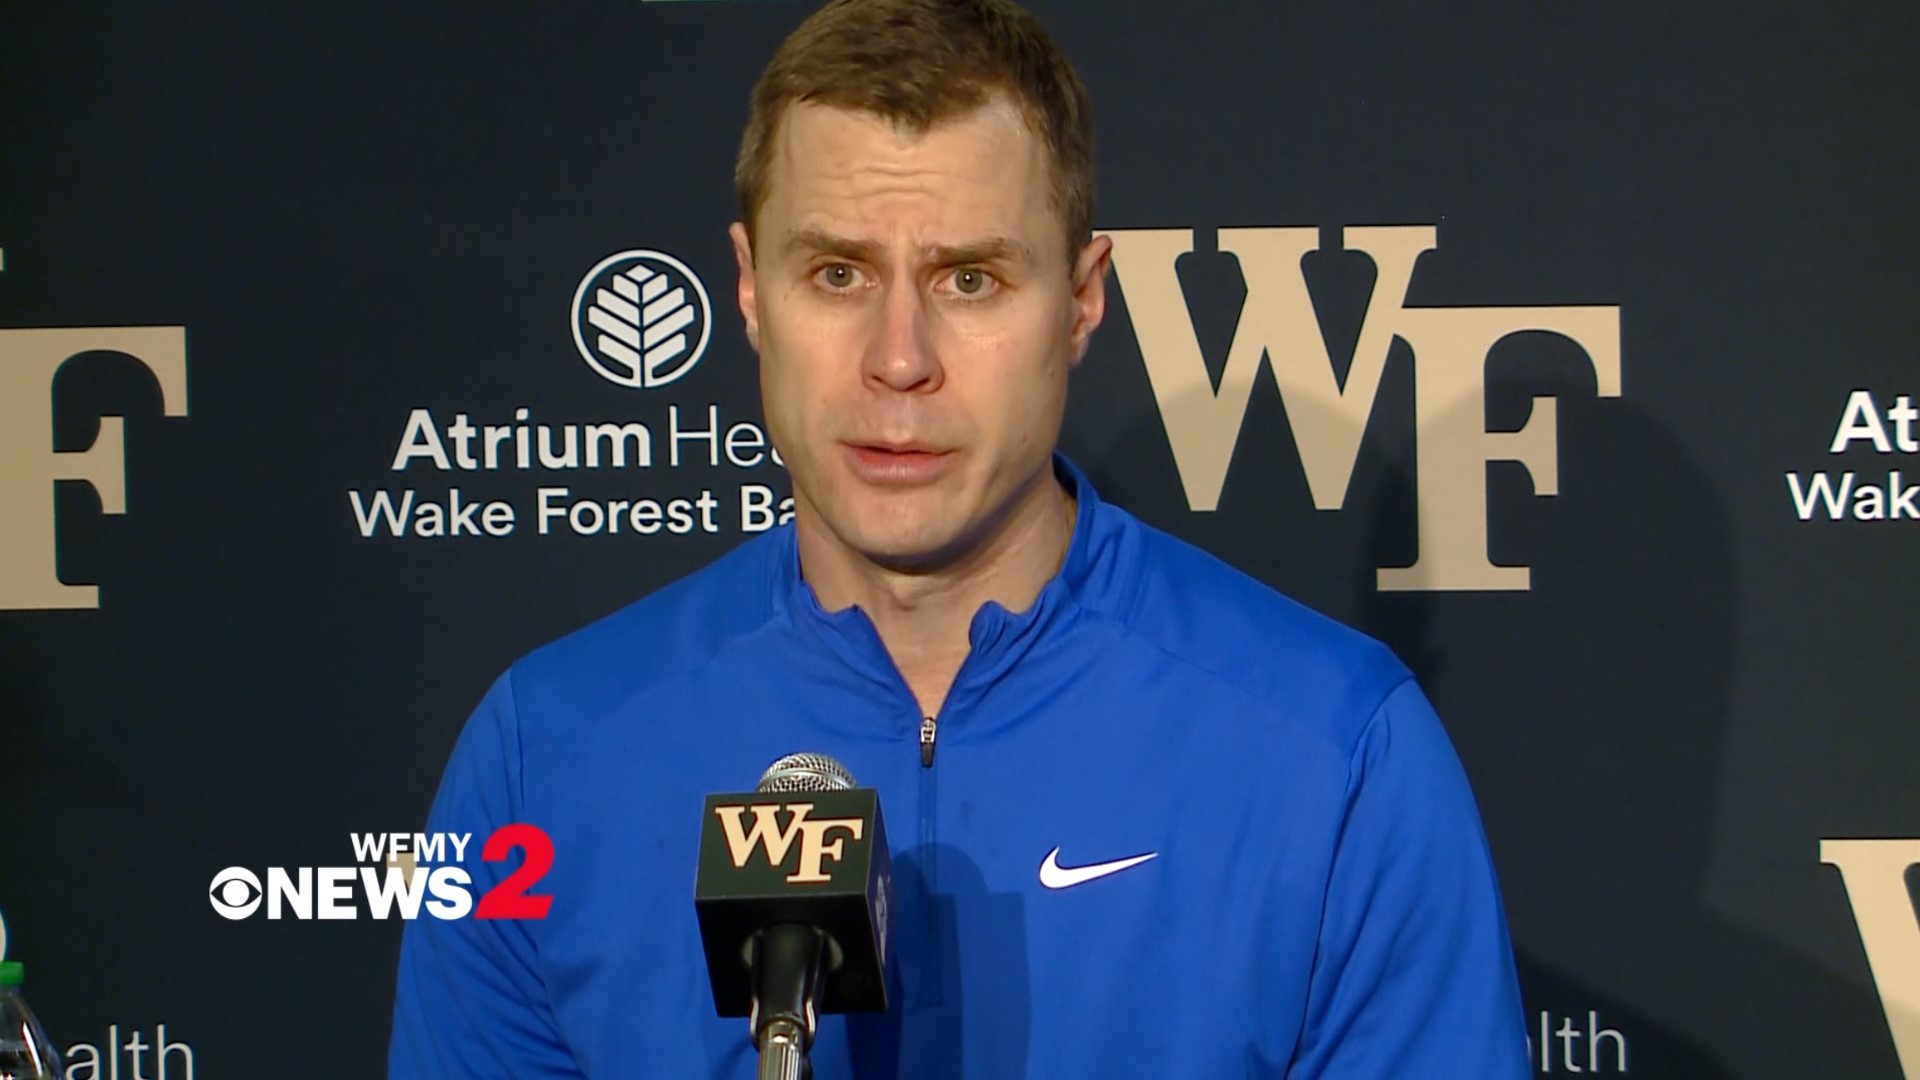 A Duke player was hurt after the court storm following the Wake Forest win.